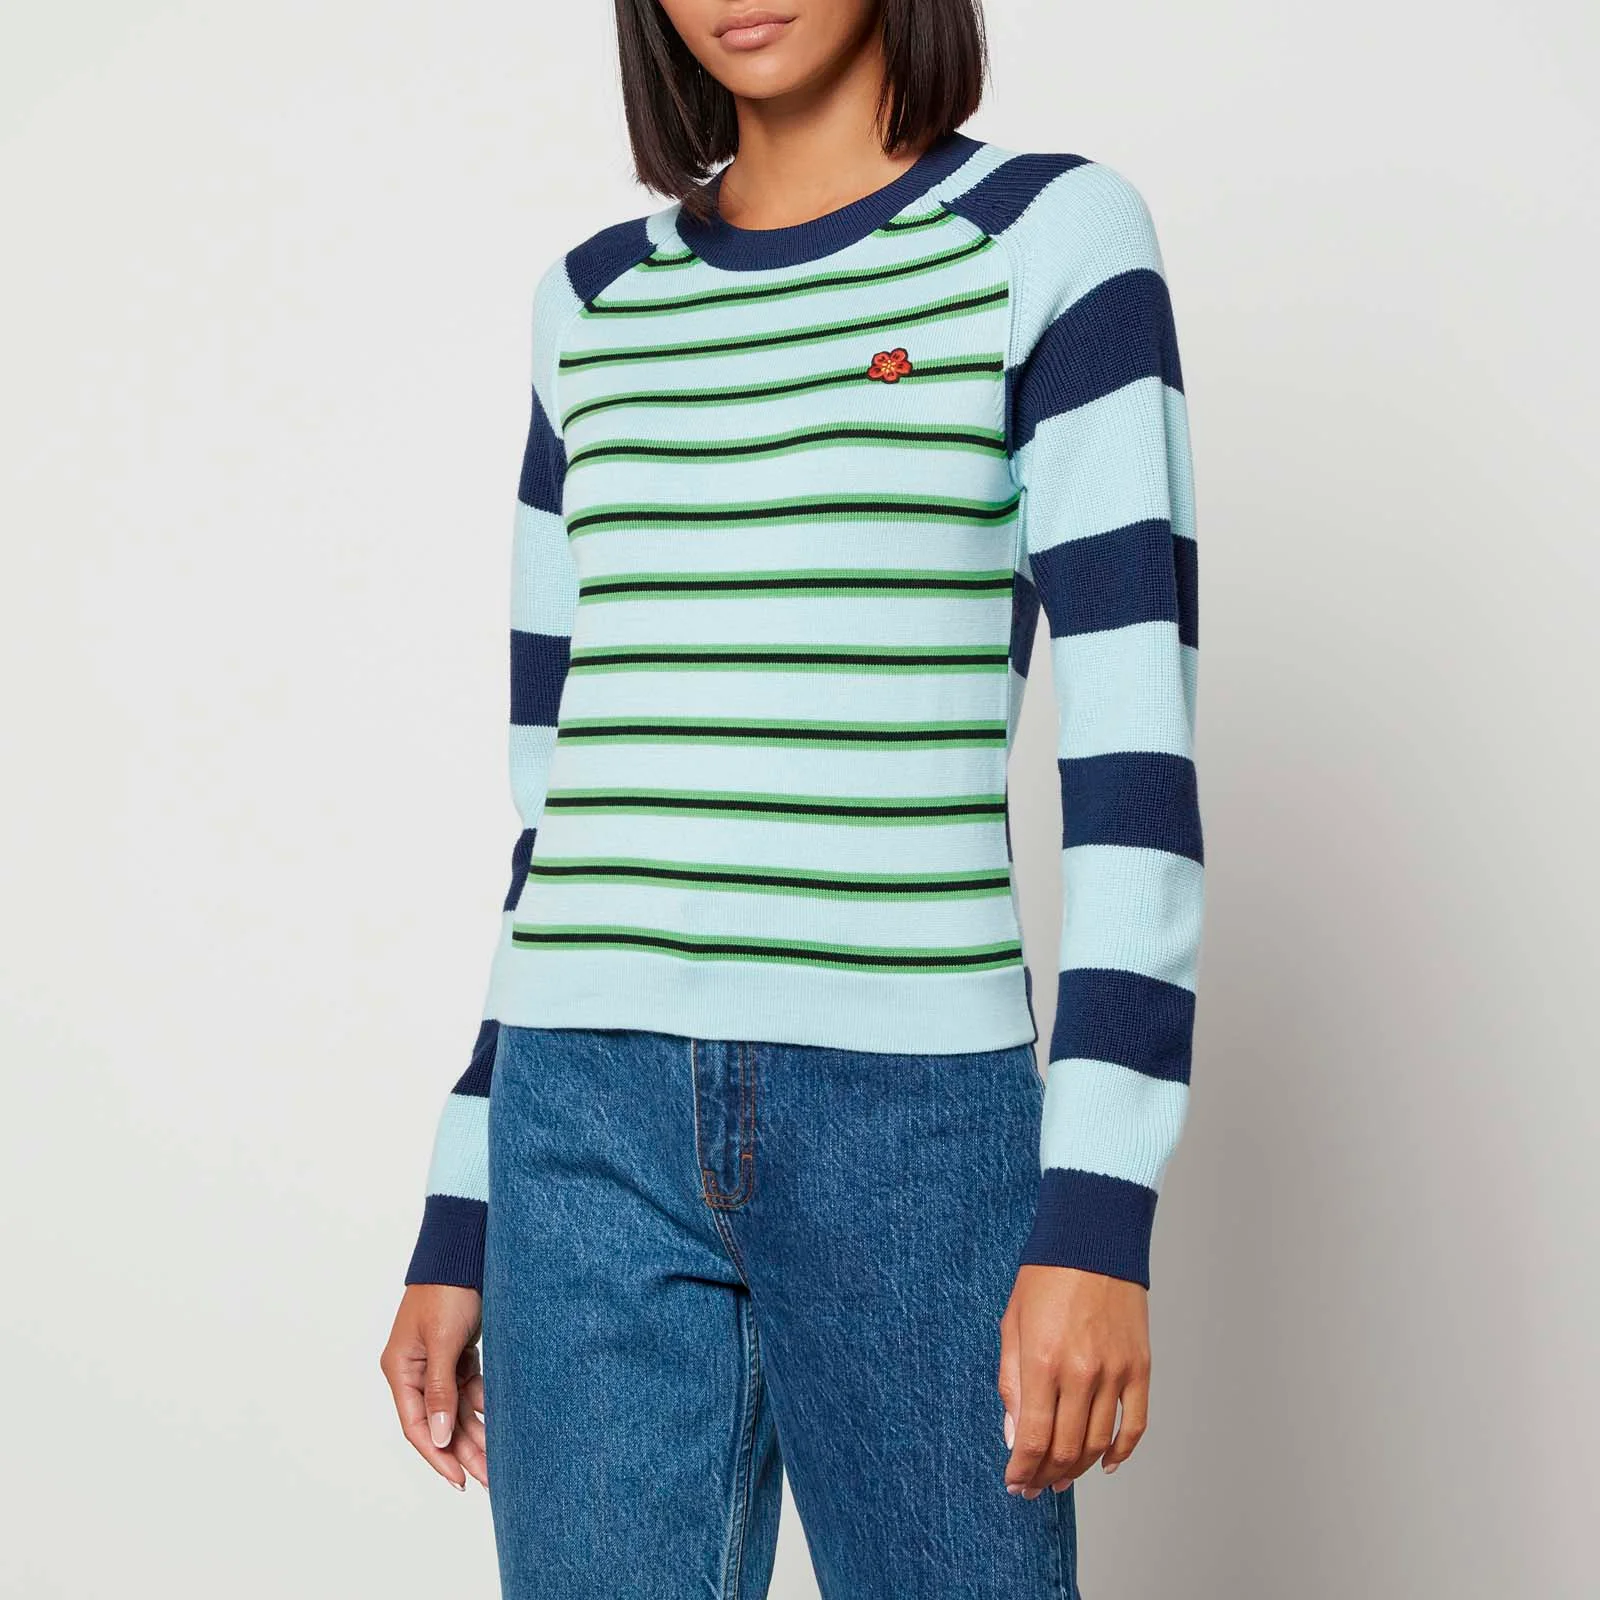 KENZO Striped Wool and Cotton-Blend Jumper Image 1